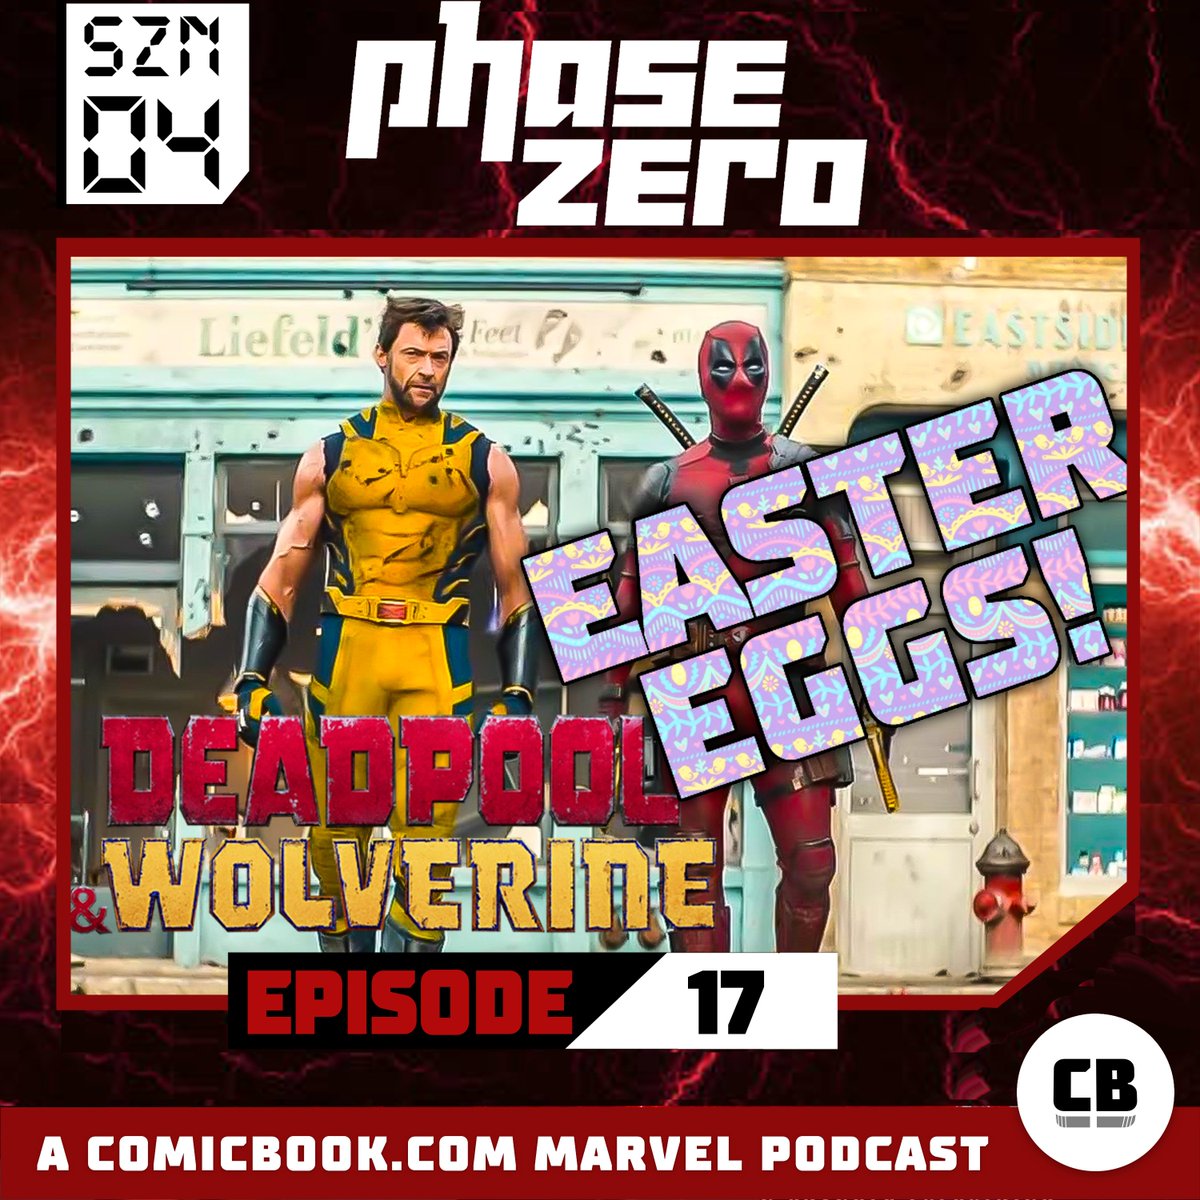 From Tom Holland's Spider-Man 4 updates to Deadpool & Wolverine theories... a packed week! Plus, #XMen97 Episode 7 review! Download & subscribe-- Apple: bit.ly/3CYe9Hm Spotify: bit.ly/3Xvvf7U YouTube: bit.ly/4derZpG